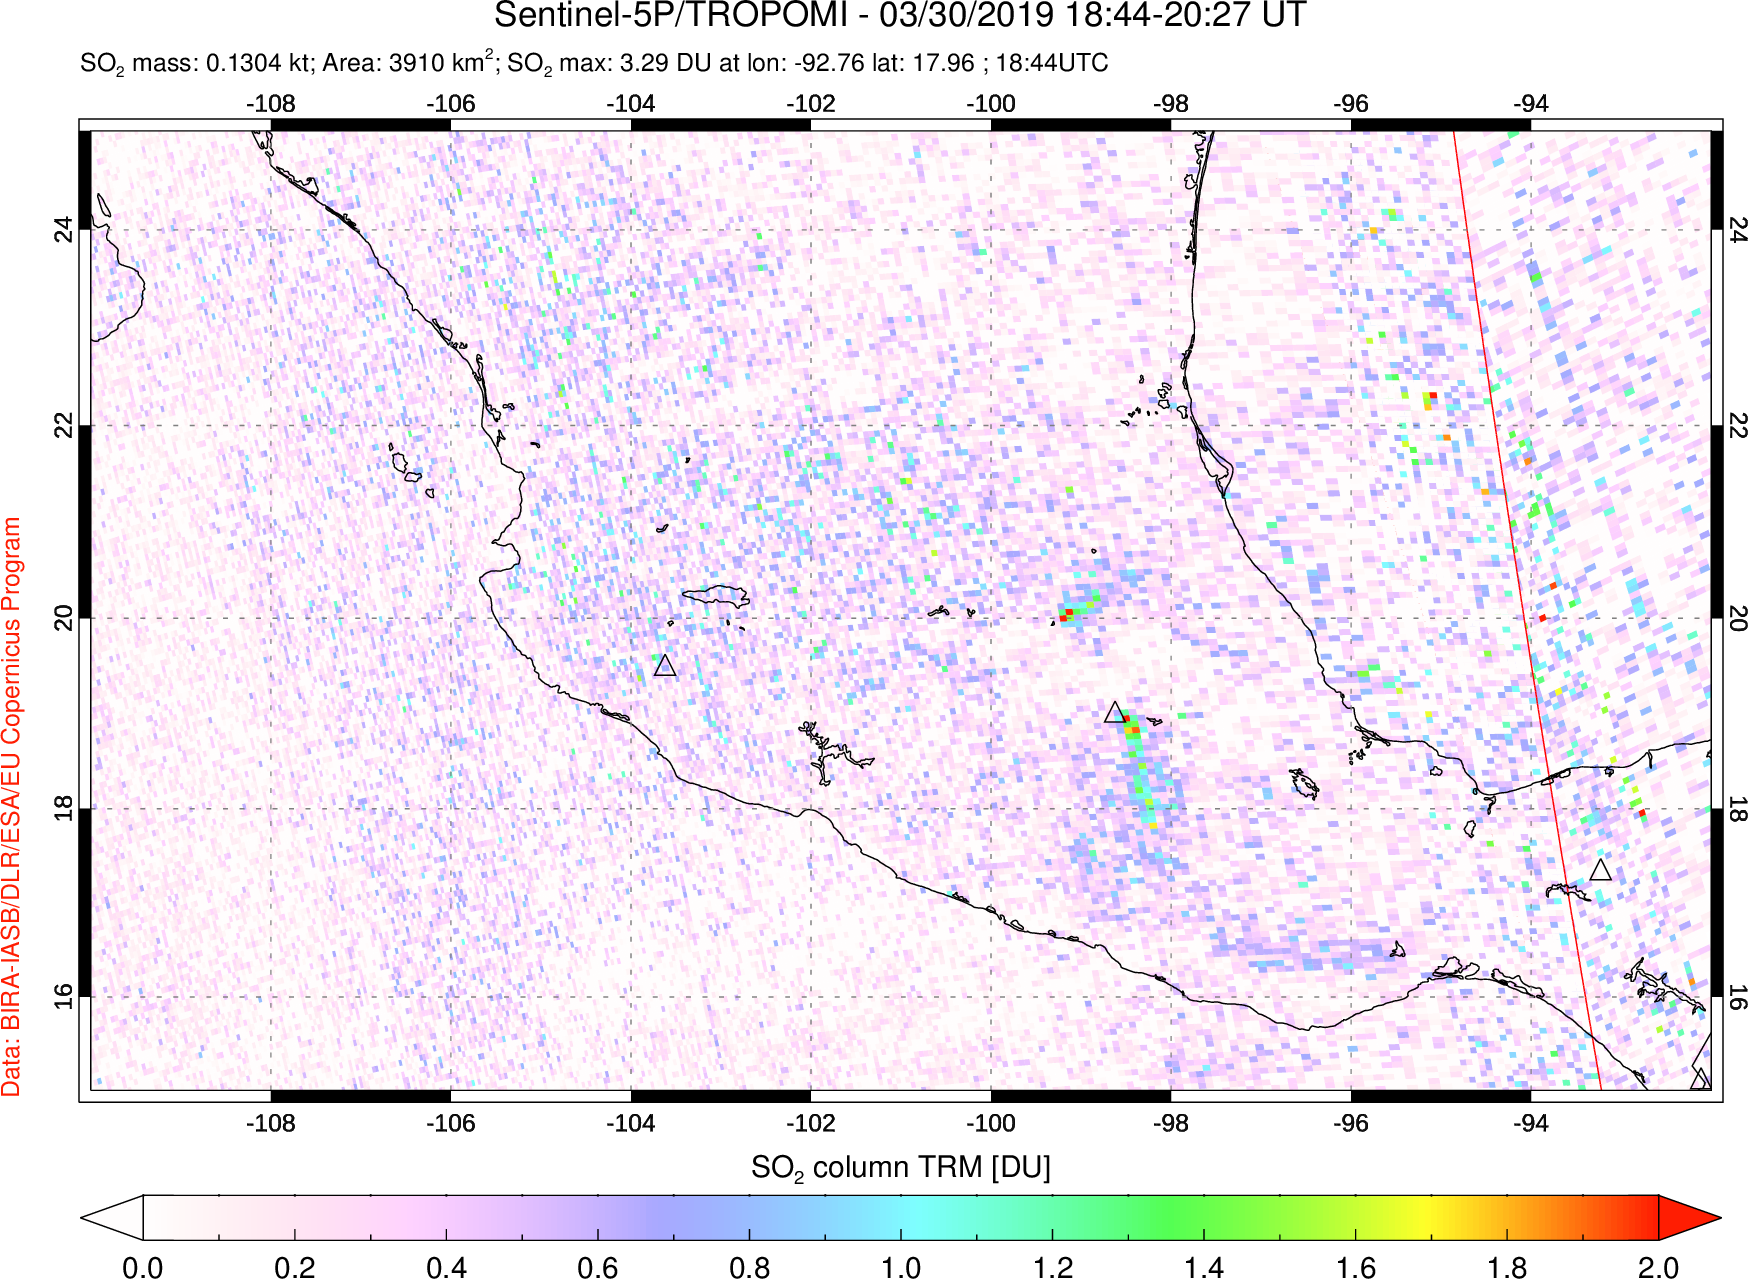 A sulfur dioxide image over Mexico on Mar 30, 2019.